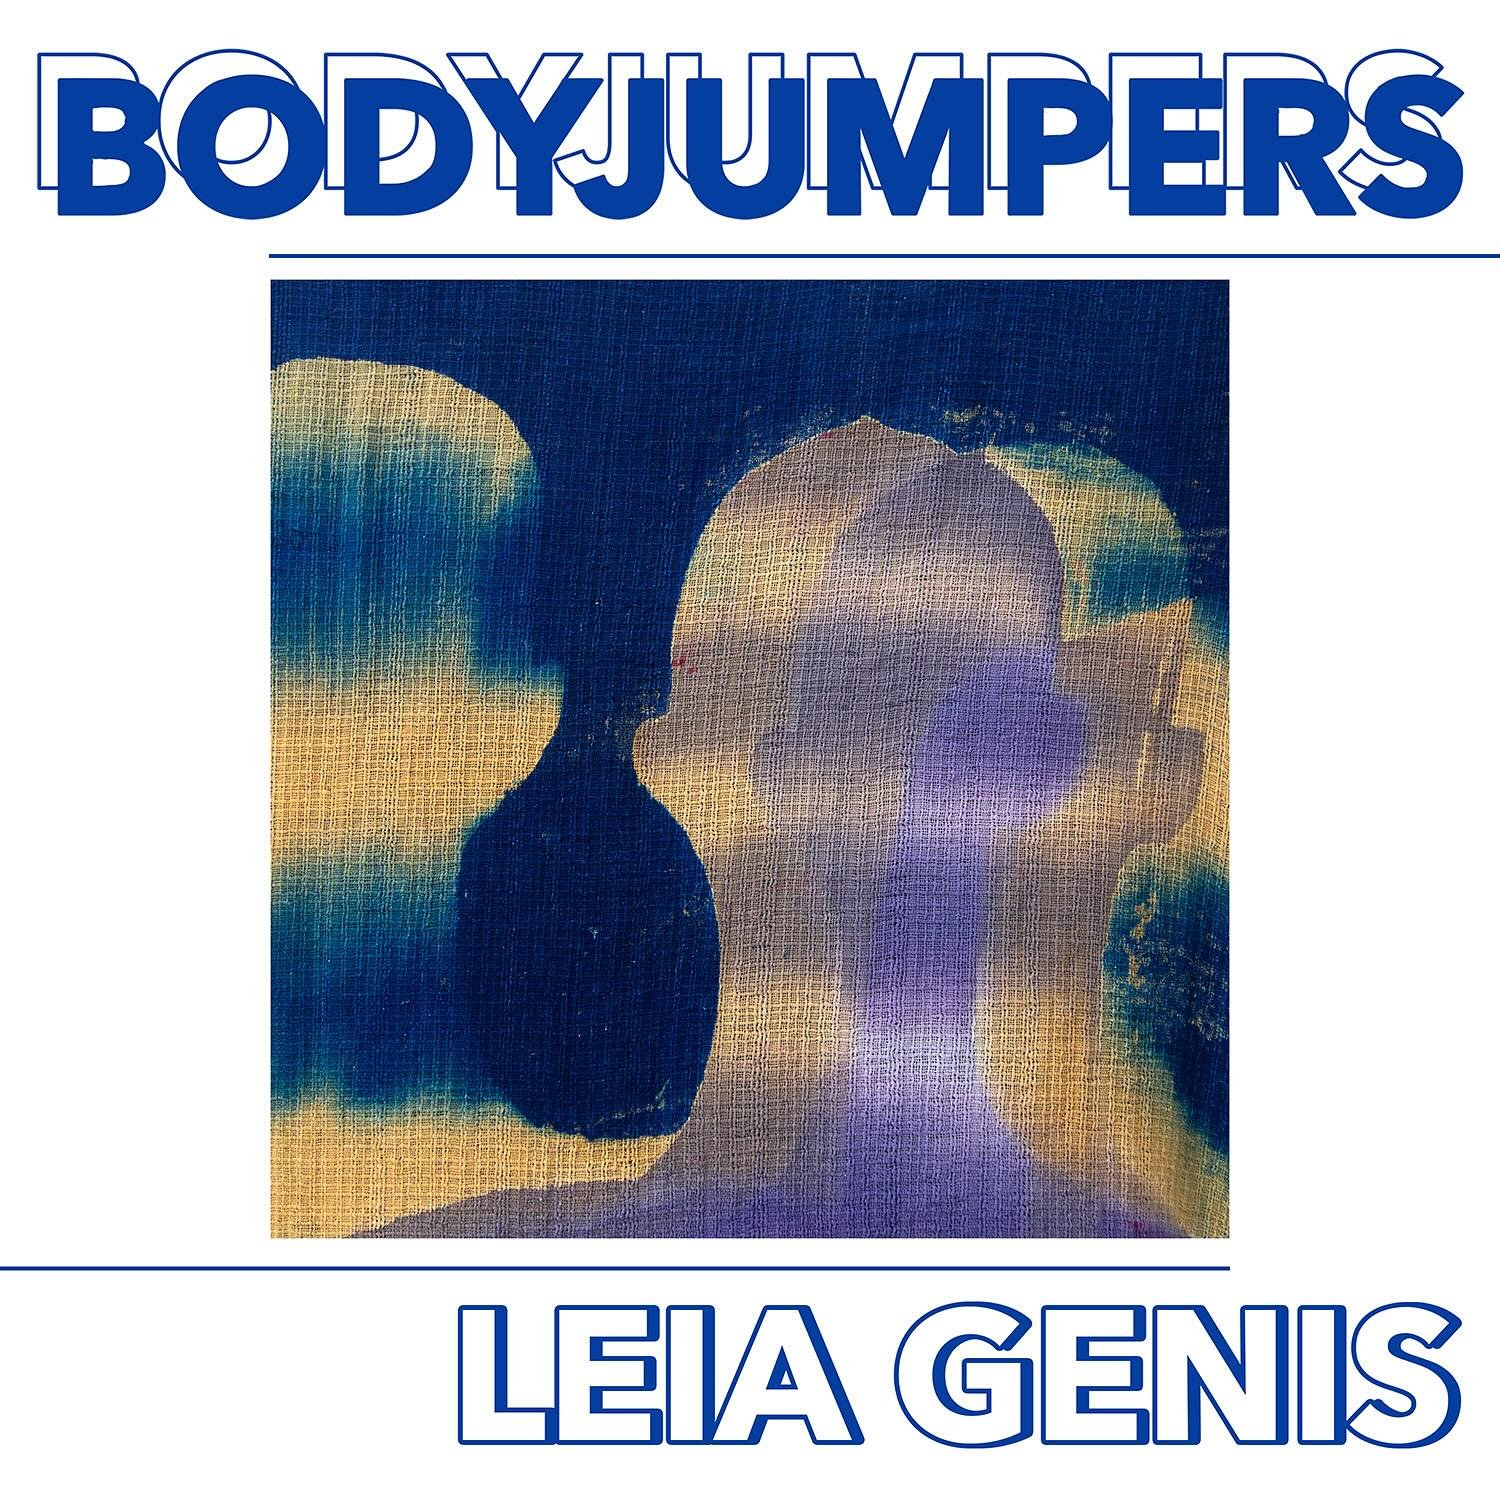 Up Next in The Ellis Gallery: &ldquo;Bodyjumpers:&rdquo; Leia Genis Solo Exhibition @leiagenis

May 3rd &ndash; June 15th, 2024

Join us for the Opening Reception on Friday, May 3rd during #FirstFridaysInStarland 

About the Artist: 

Leia Genis (b. 